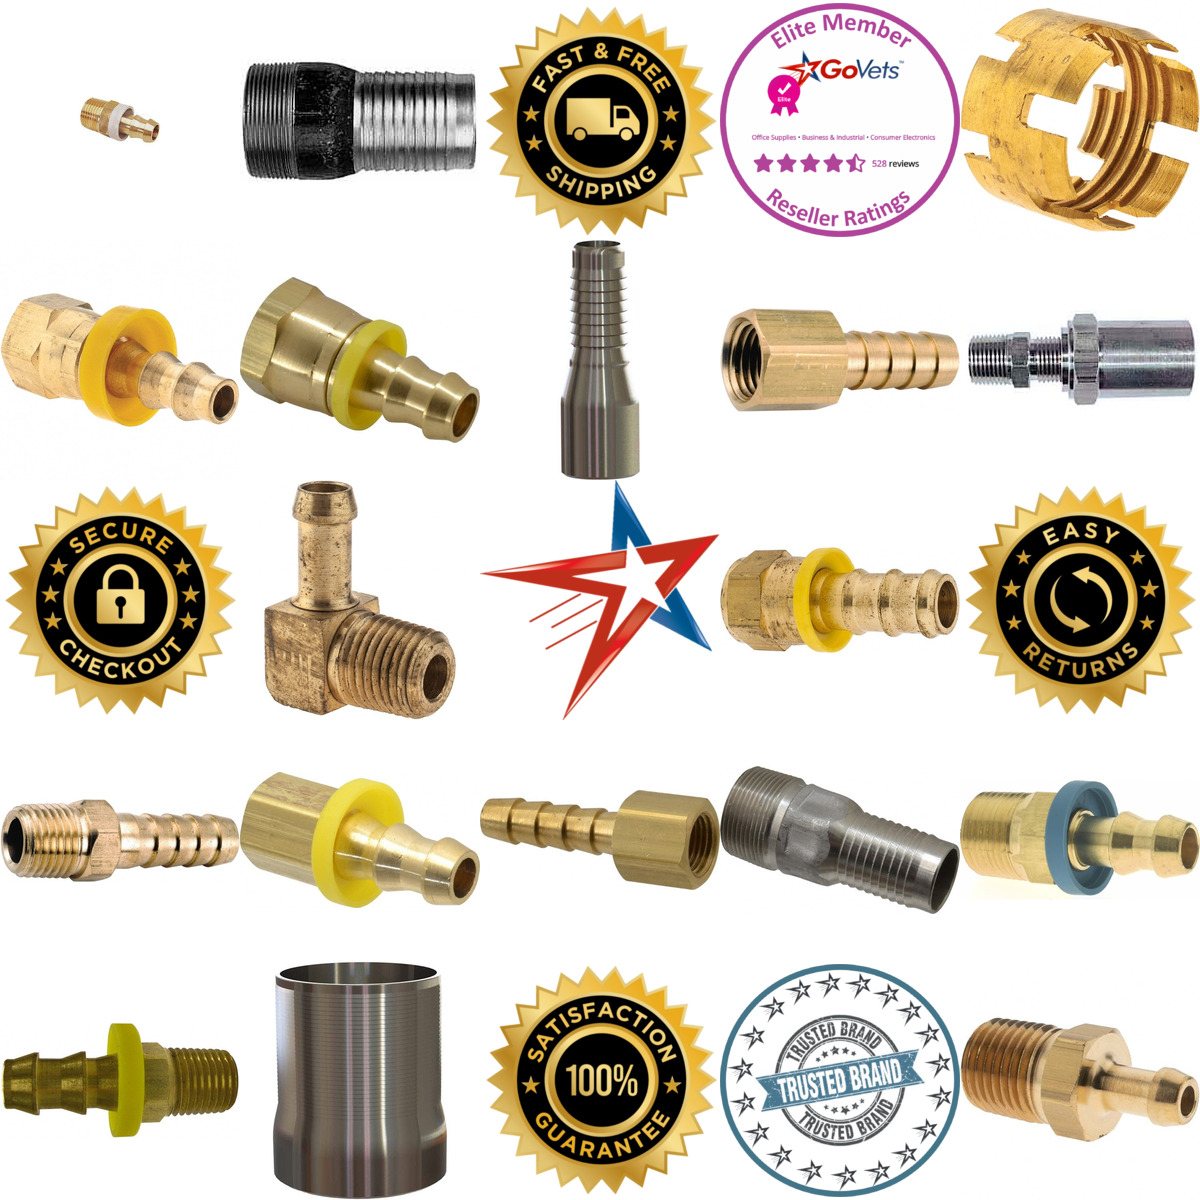 A selection of Hose Fittings products on GoVets